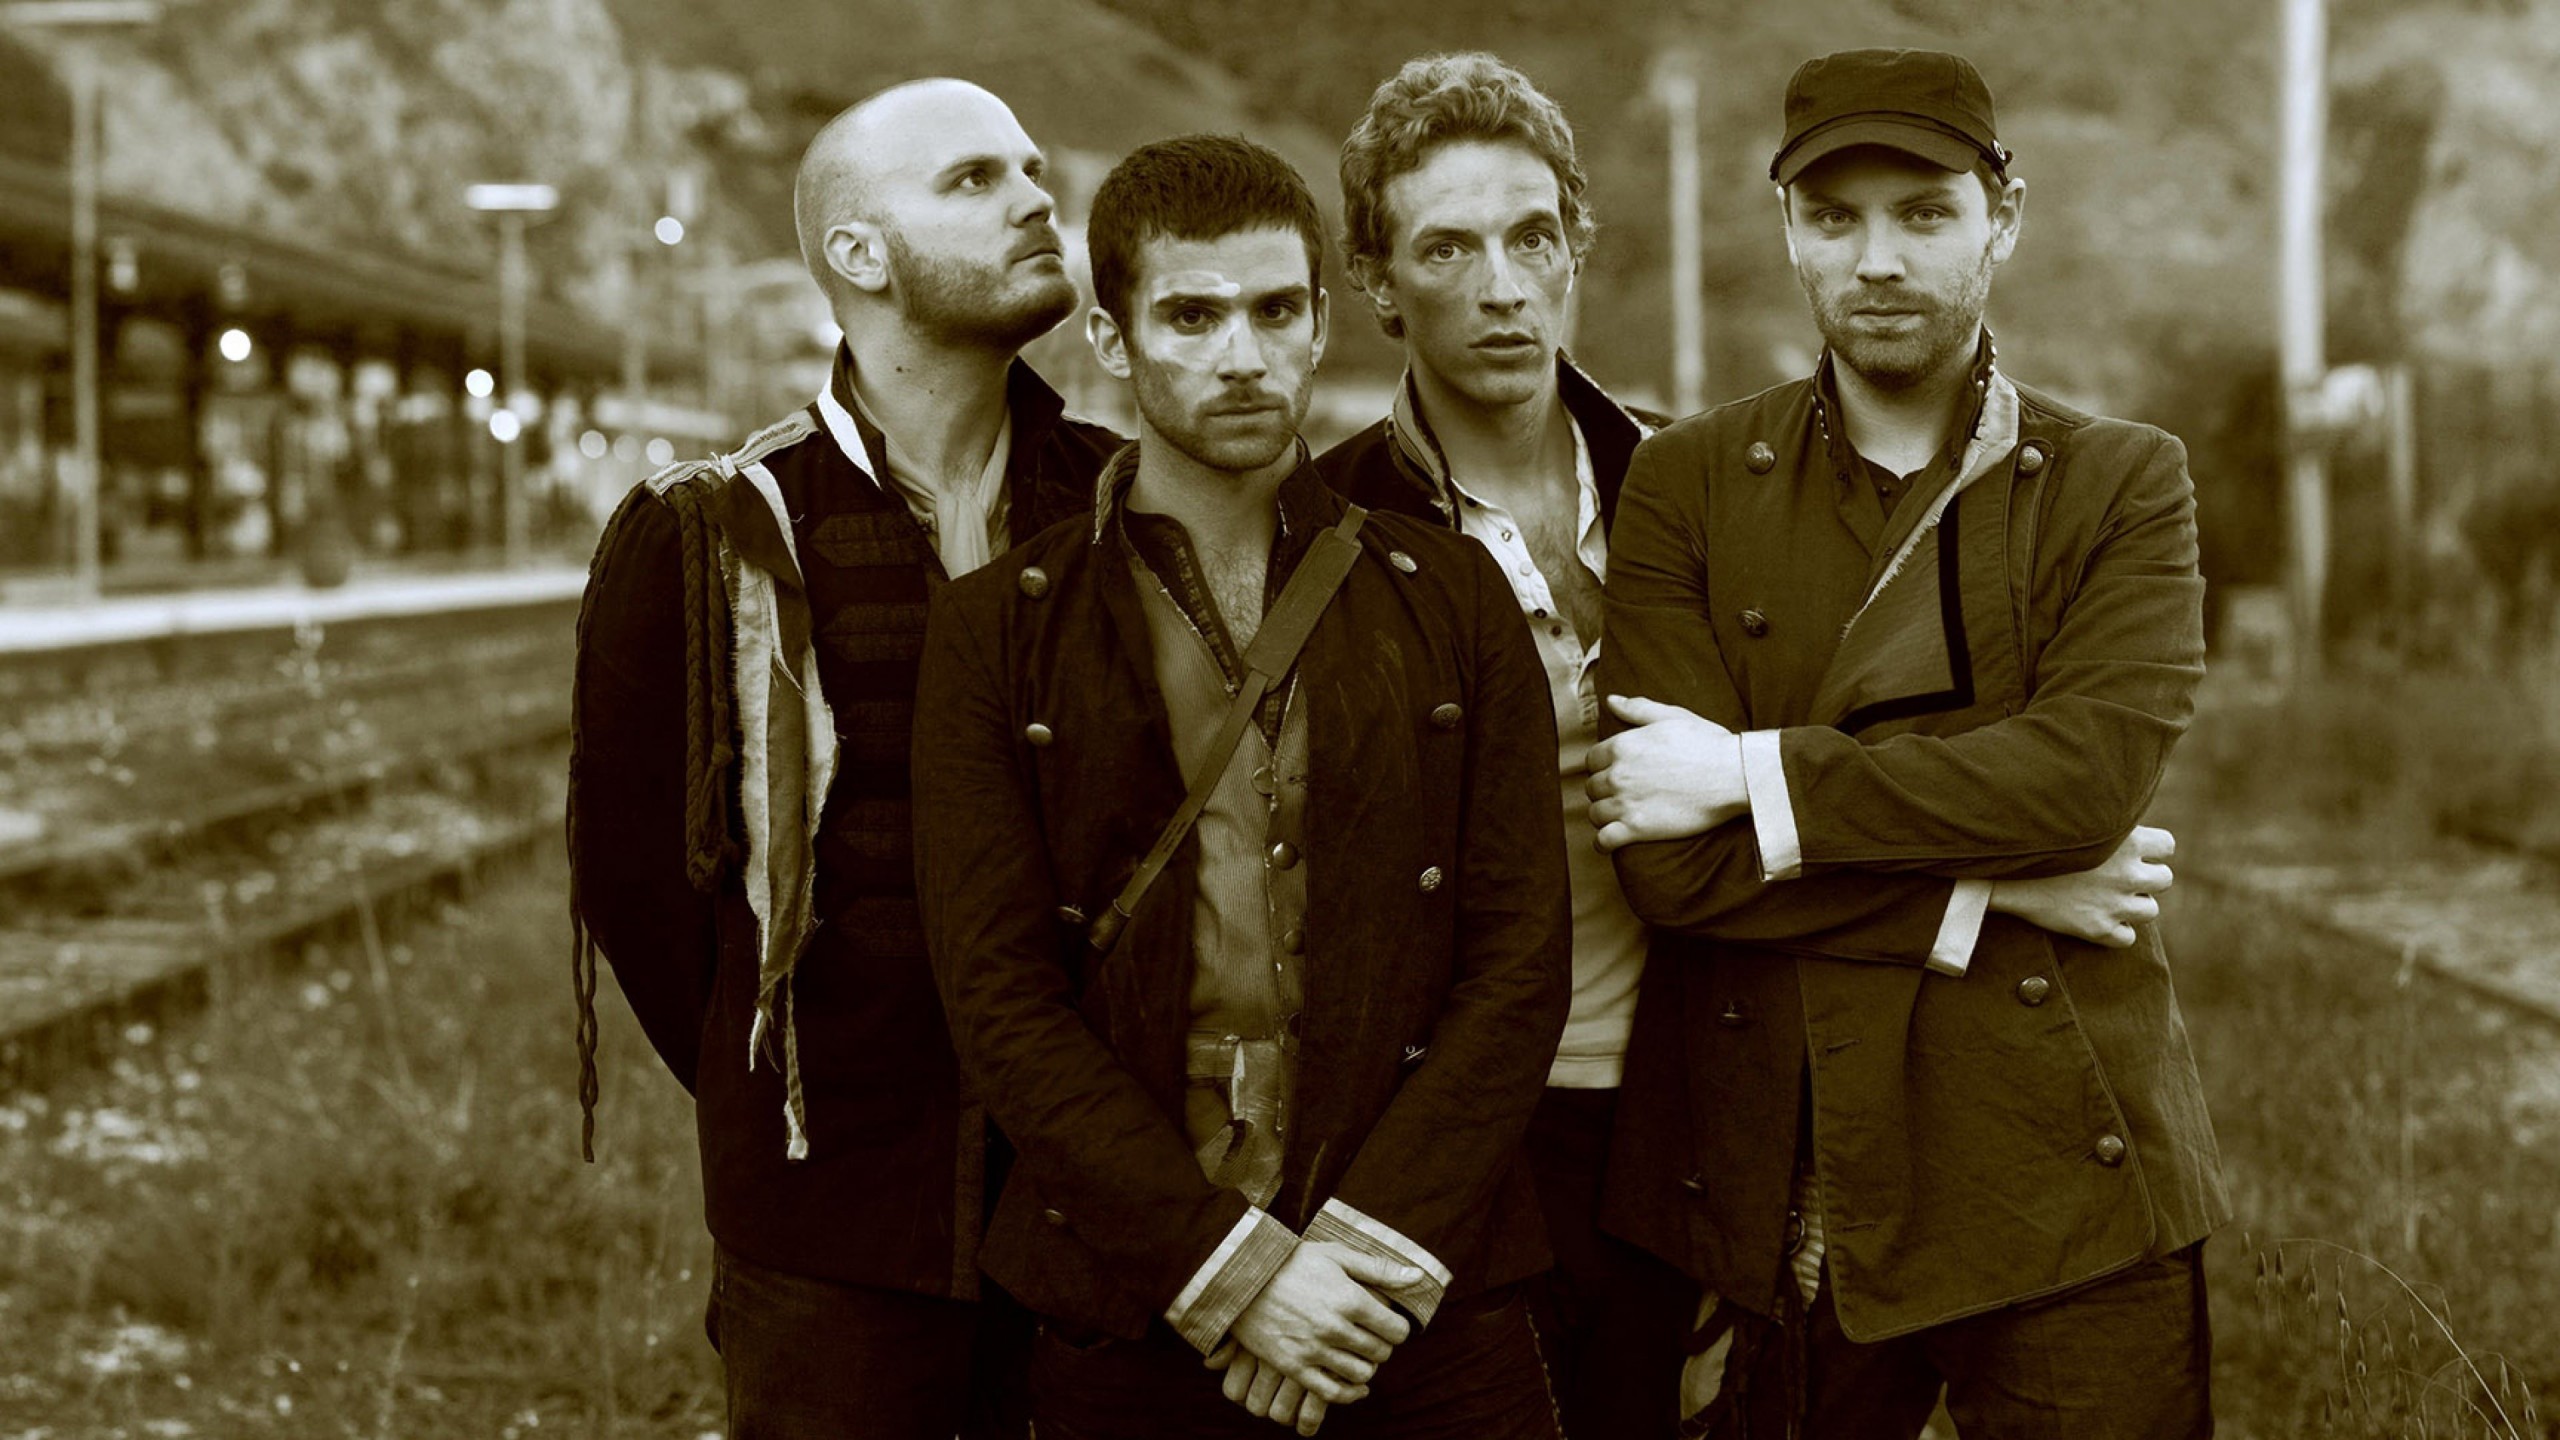 Coldplay Band Sepia Wallpaper for Social Media YouTube Channel Art